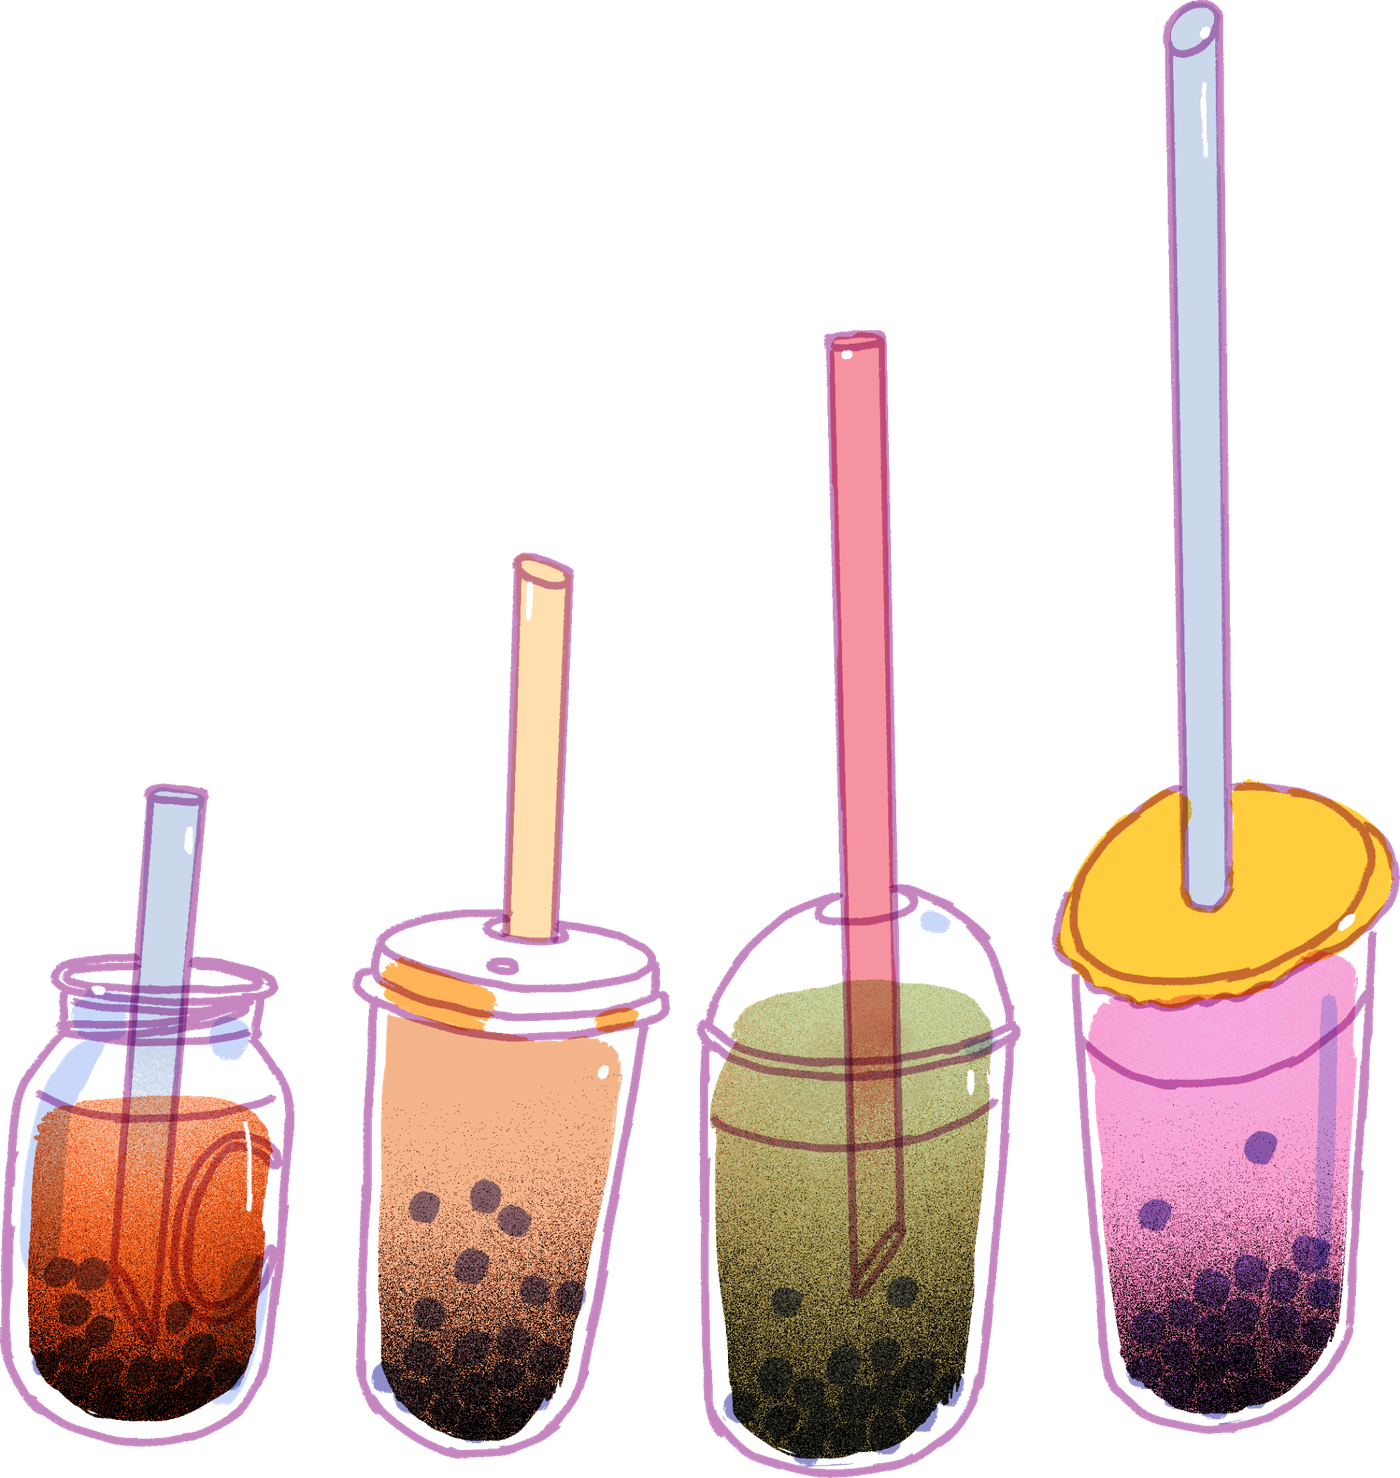 How Bubble Tea Became A Complicated Symbol Of Asian American